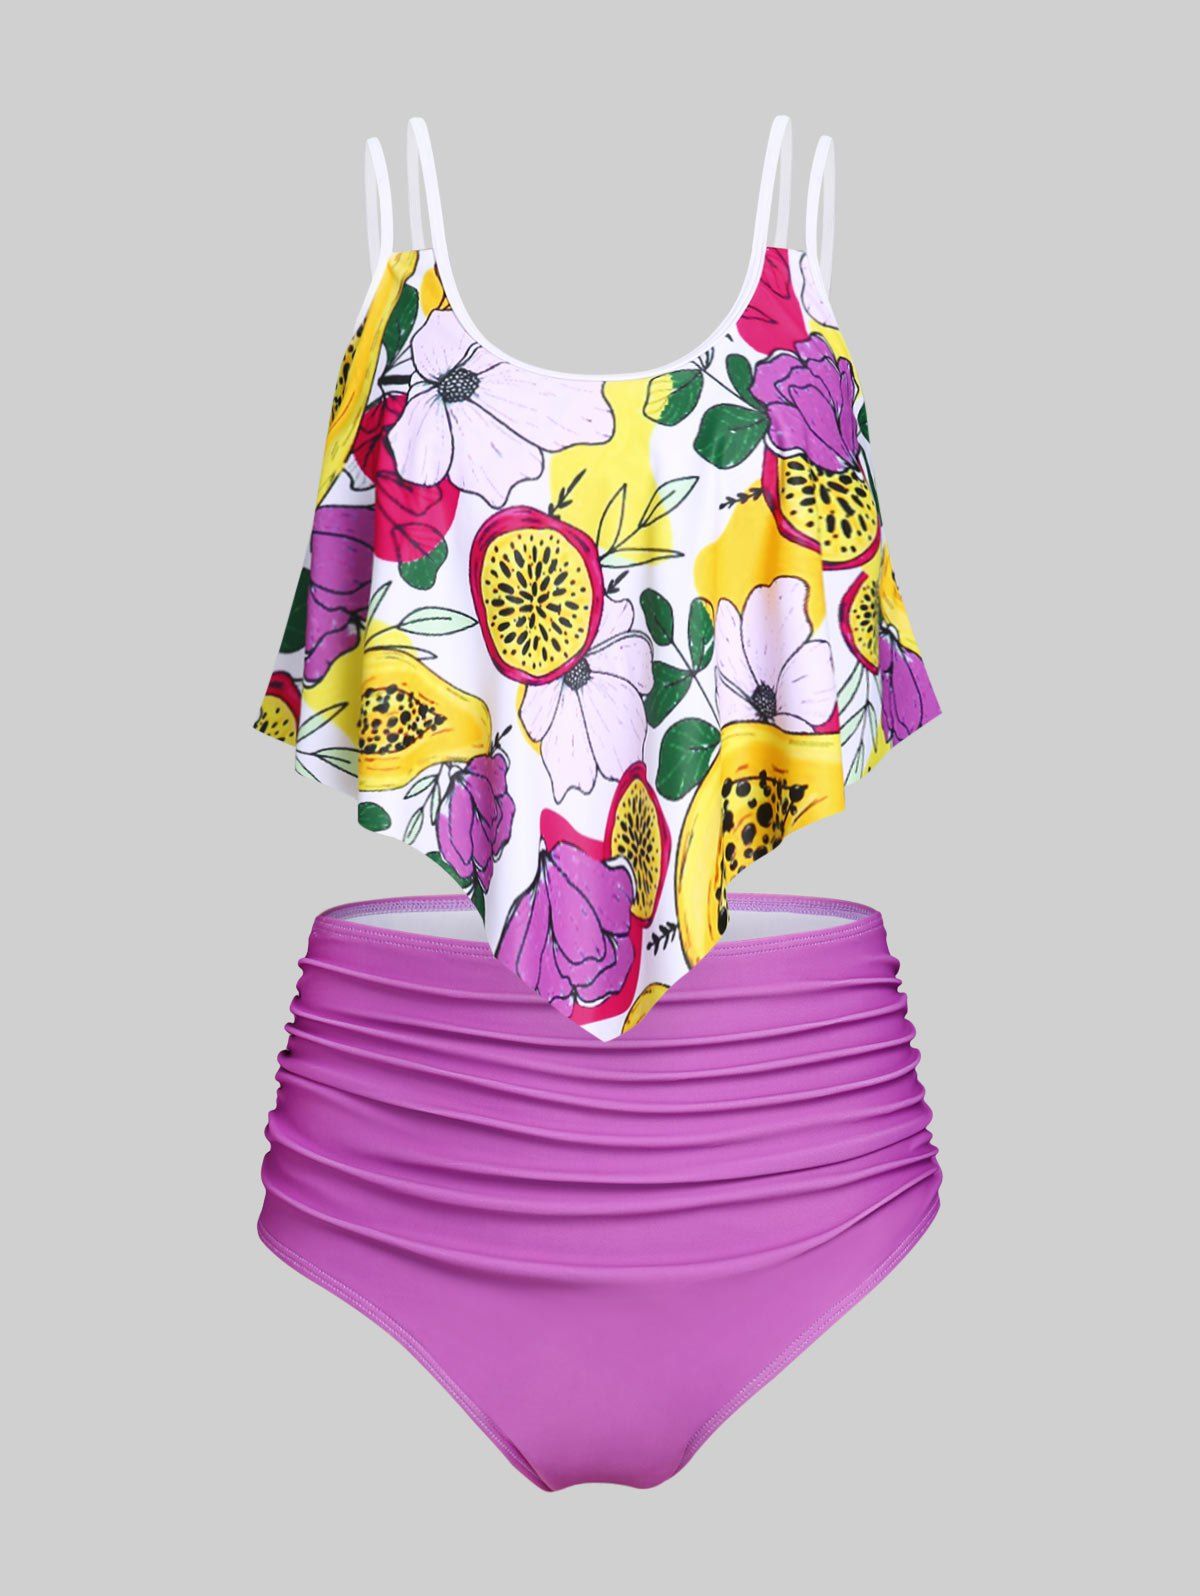 Plus Size & Curve Ruffled Floral Print Ruched Tankini Swimsuit - multicolor A 5X